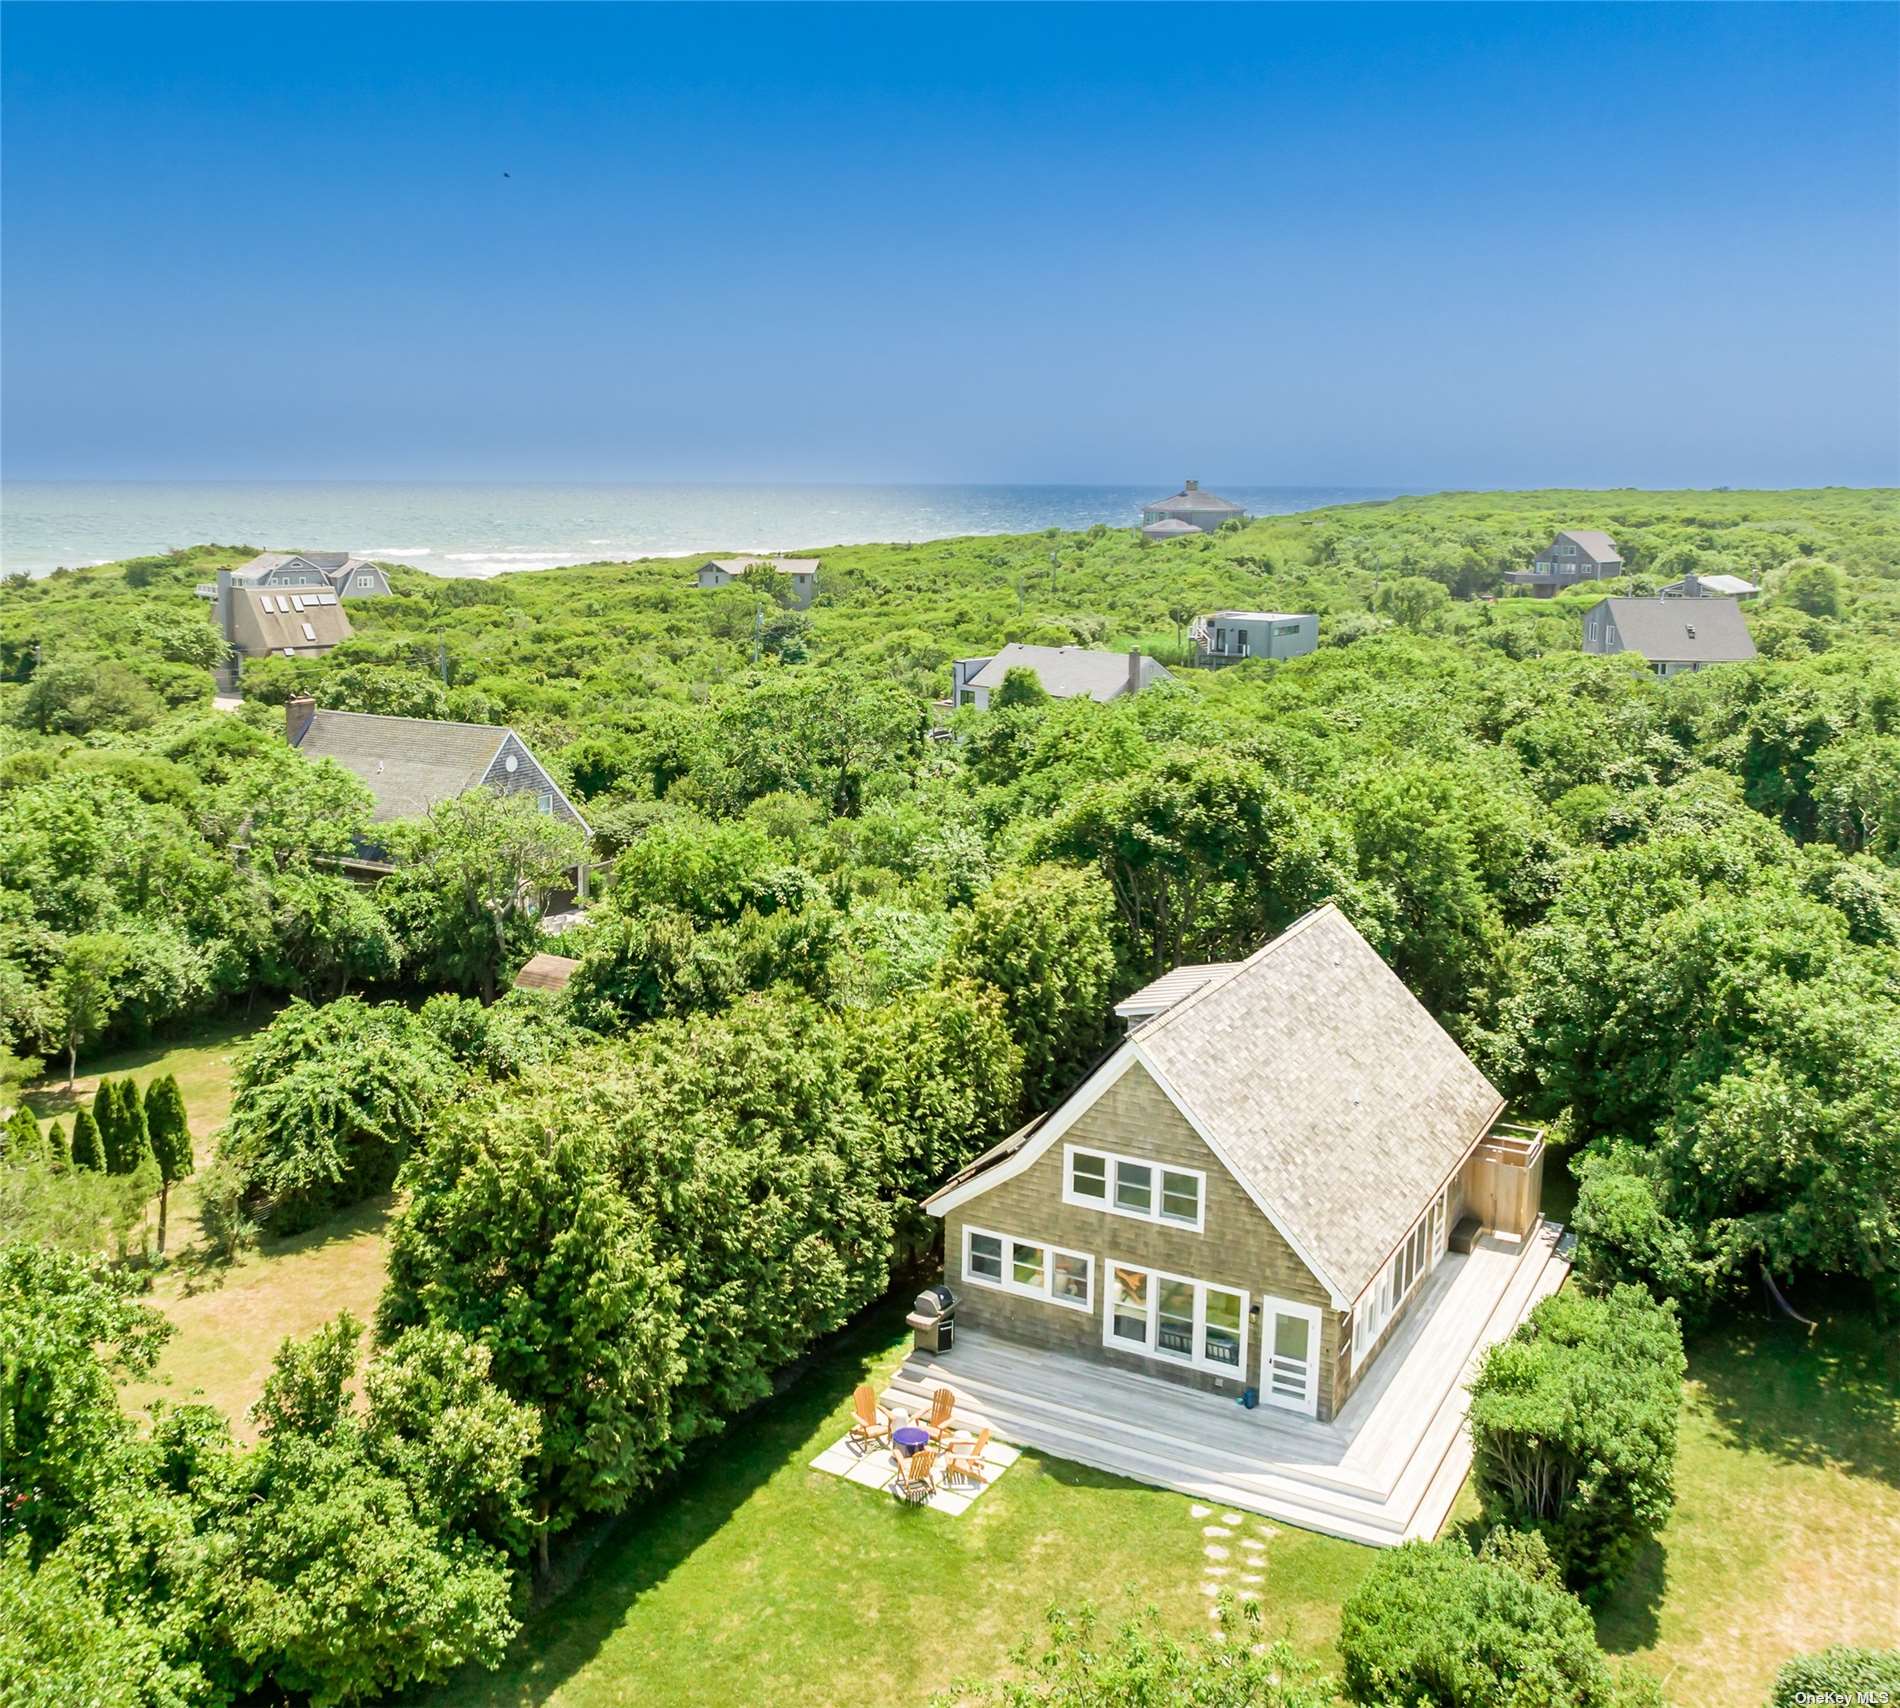 Property for Sale at 40 Ditch Road, Montauk, Hamptons, NY - Bedrooms: 3 
Bathrooms: 3  - $2,795,000